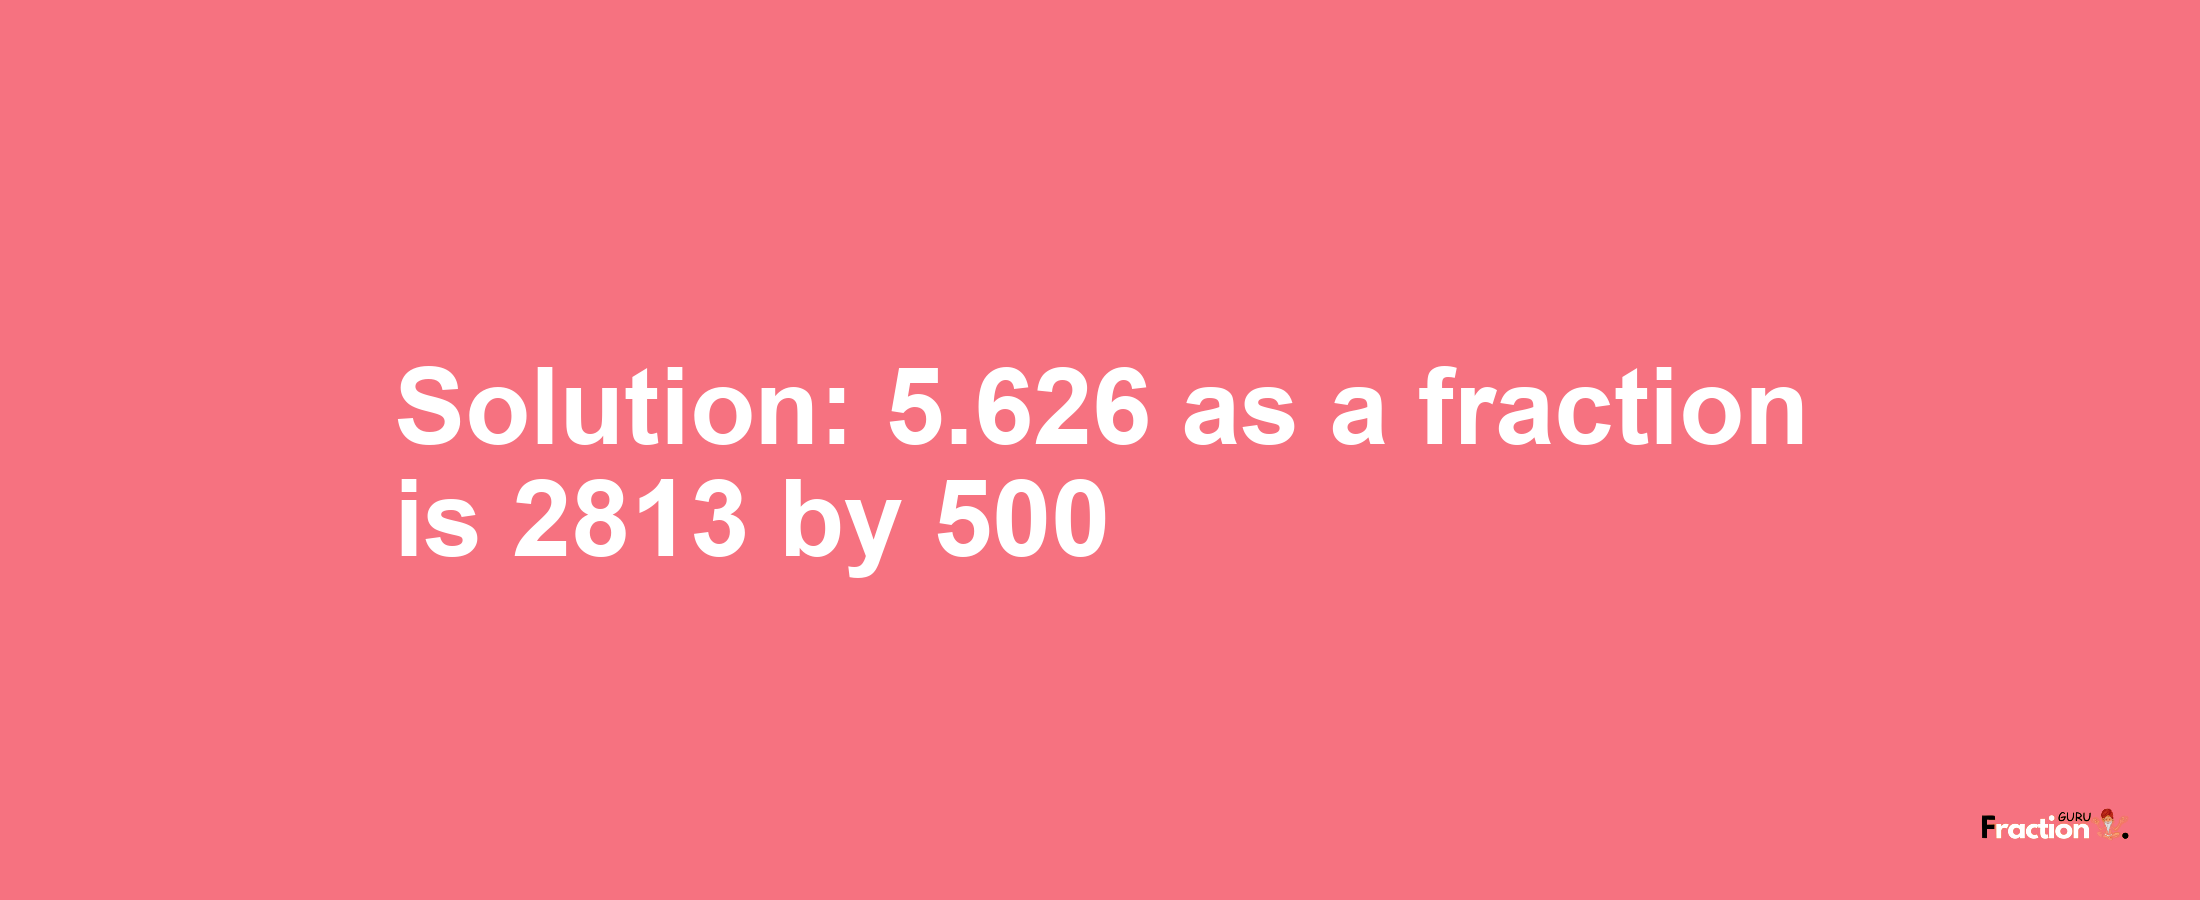 Solution:5.626 as a fraction is 2813/500